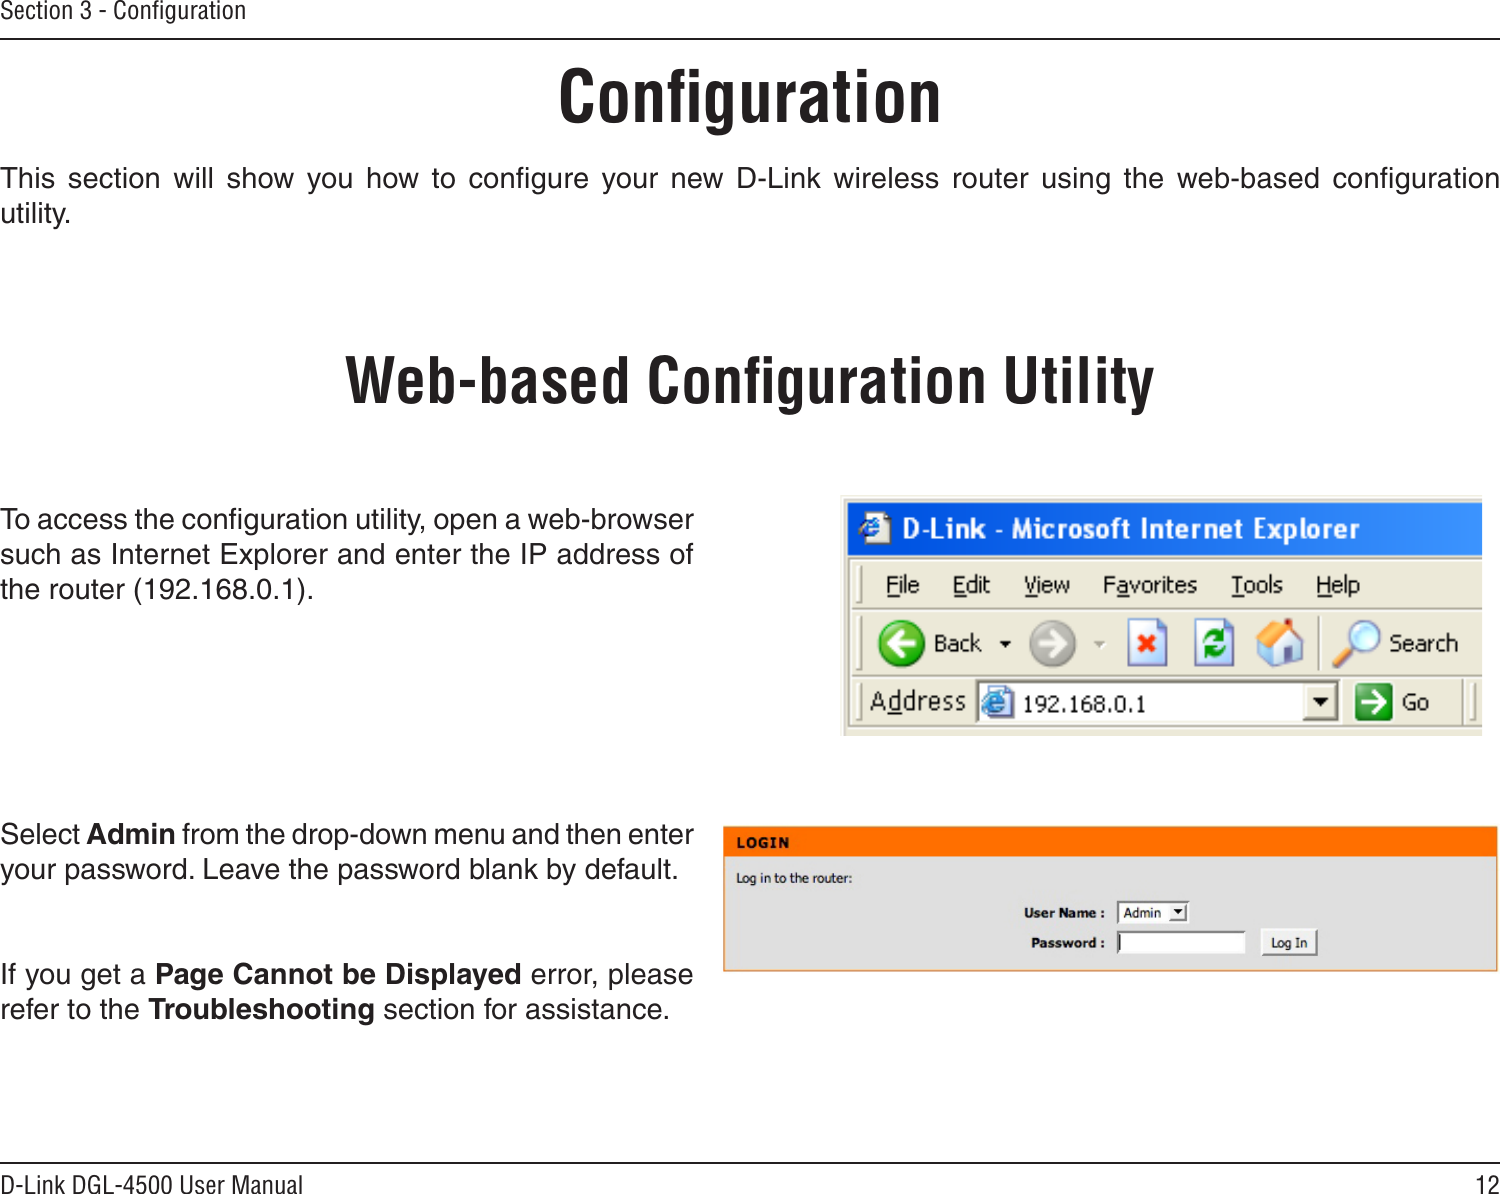 12D-Link DGL-4500 User ManualSection 3 - ConﬁgurationConﬁgurationThis  section  will  show  you  how  to  conﬁgure  your  new  D-Link  wireless  router  using  the  web-based  conﬁguration utility.Web-based Conﬁguration UtilityTo access the conﬁguration utility, open a web-browser such as Internet Explorer and enter the IP address of the router (192.168.0.1).Select Admin from the drop-down menu and then enter your password. Leave the password blank by default.If you get a Page Cannot be Displayed error, please refer to the Troubleshooting section for assistance.